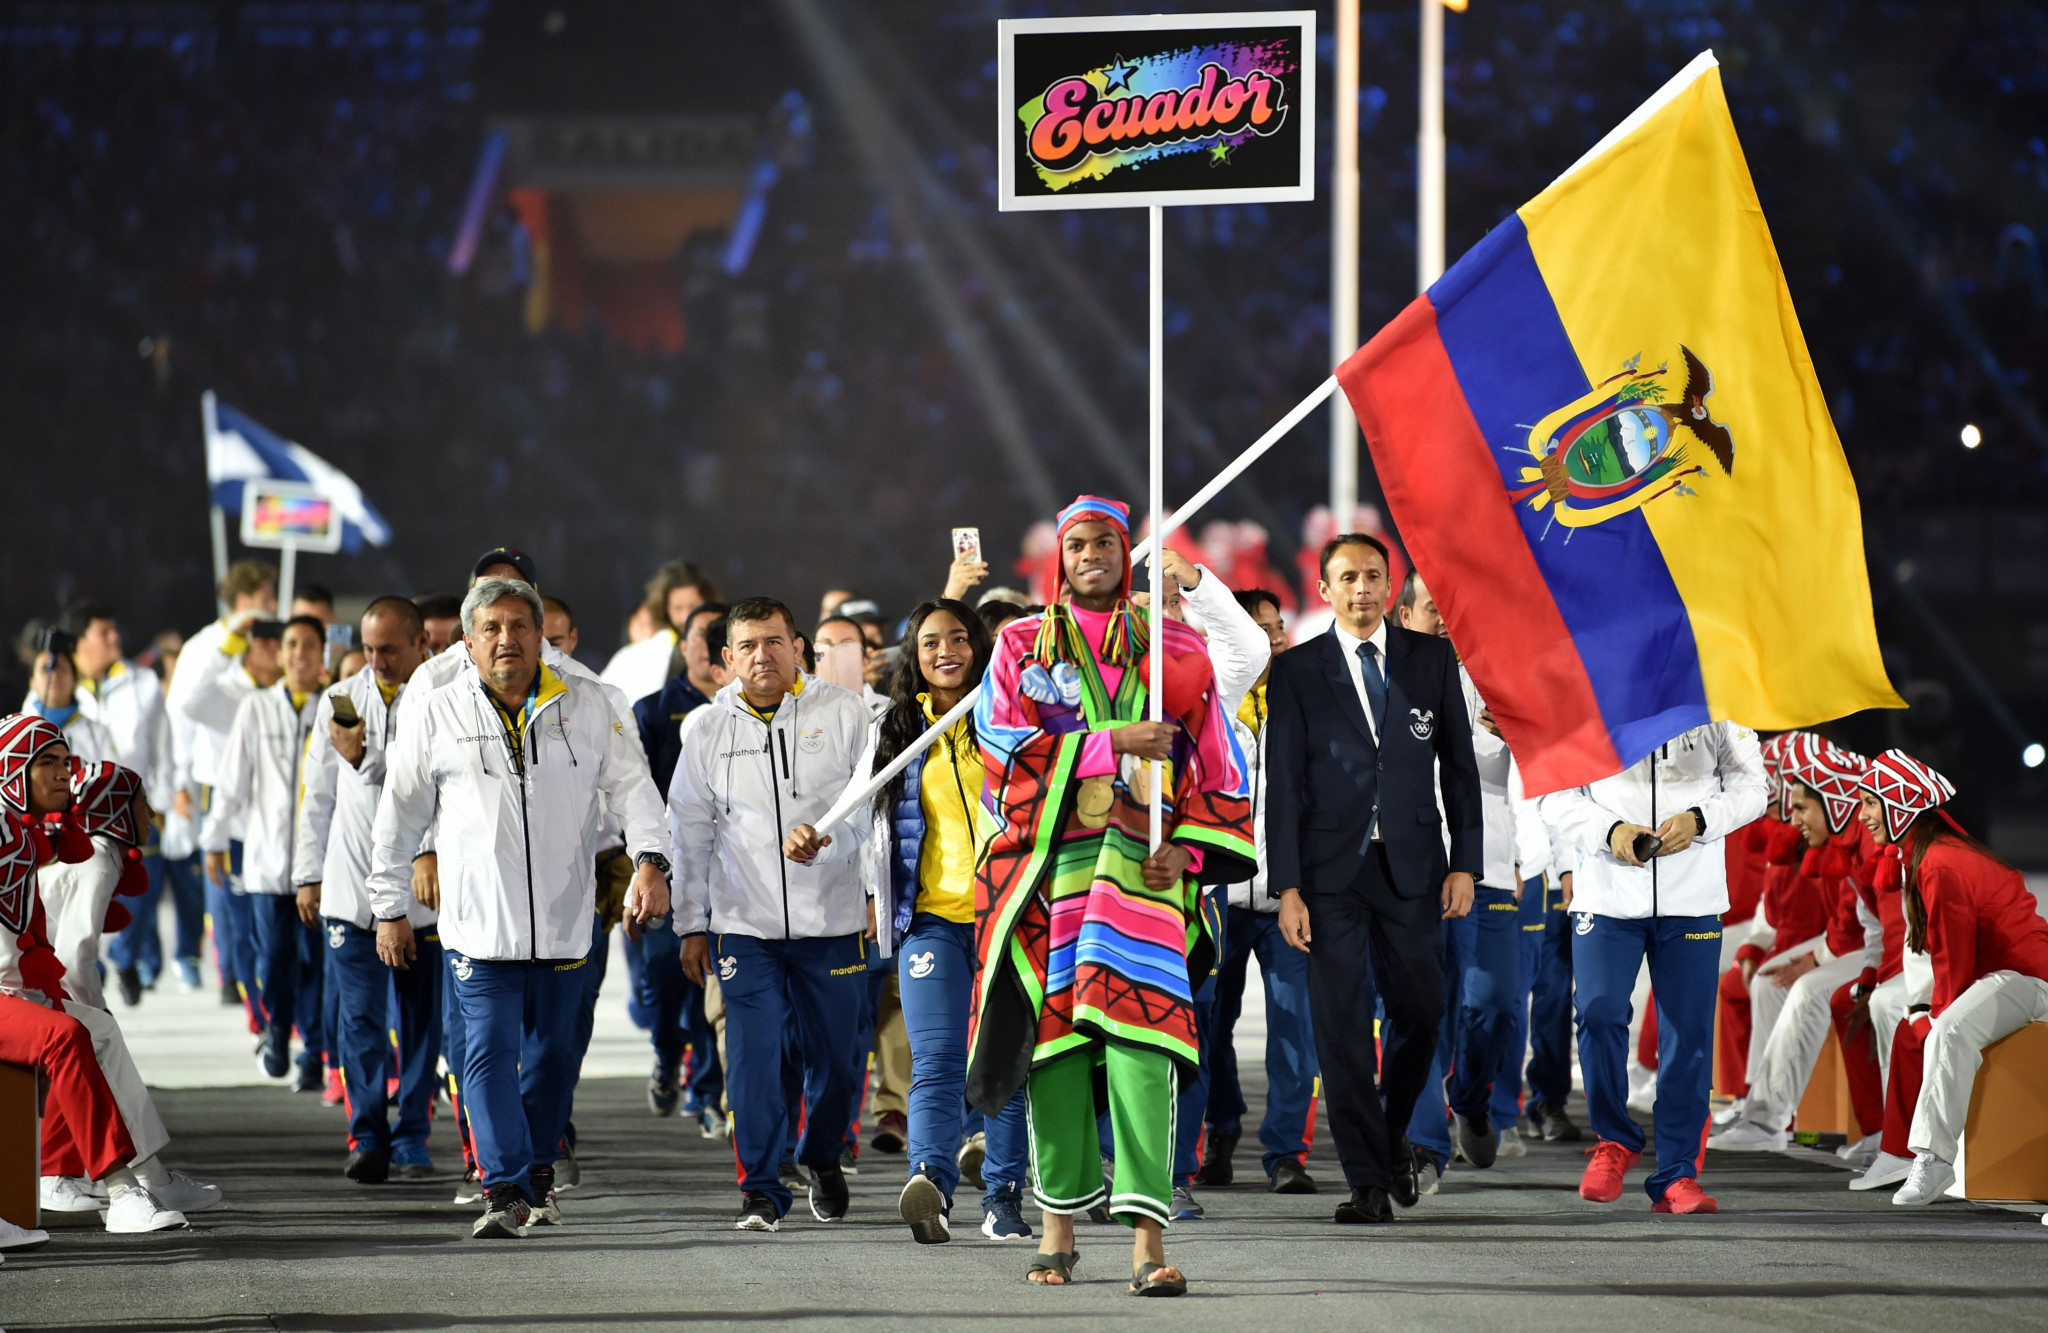 Tamara Salazar - Ecuador's flagbearer at the Liam 2019 Pan American Games Opening Ceremony - was in impressive form in Cali ©Getty Images